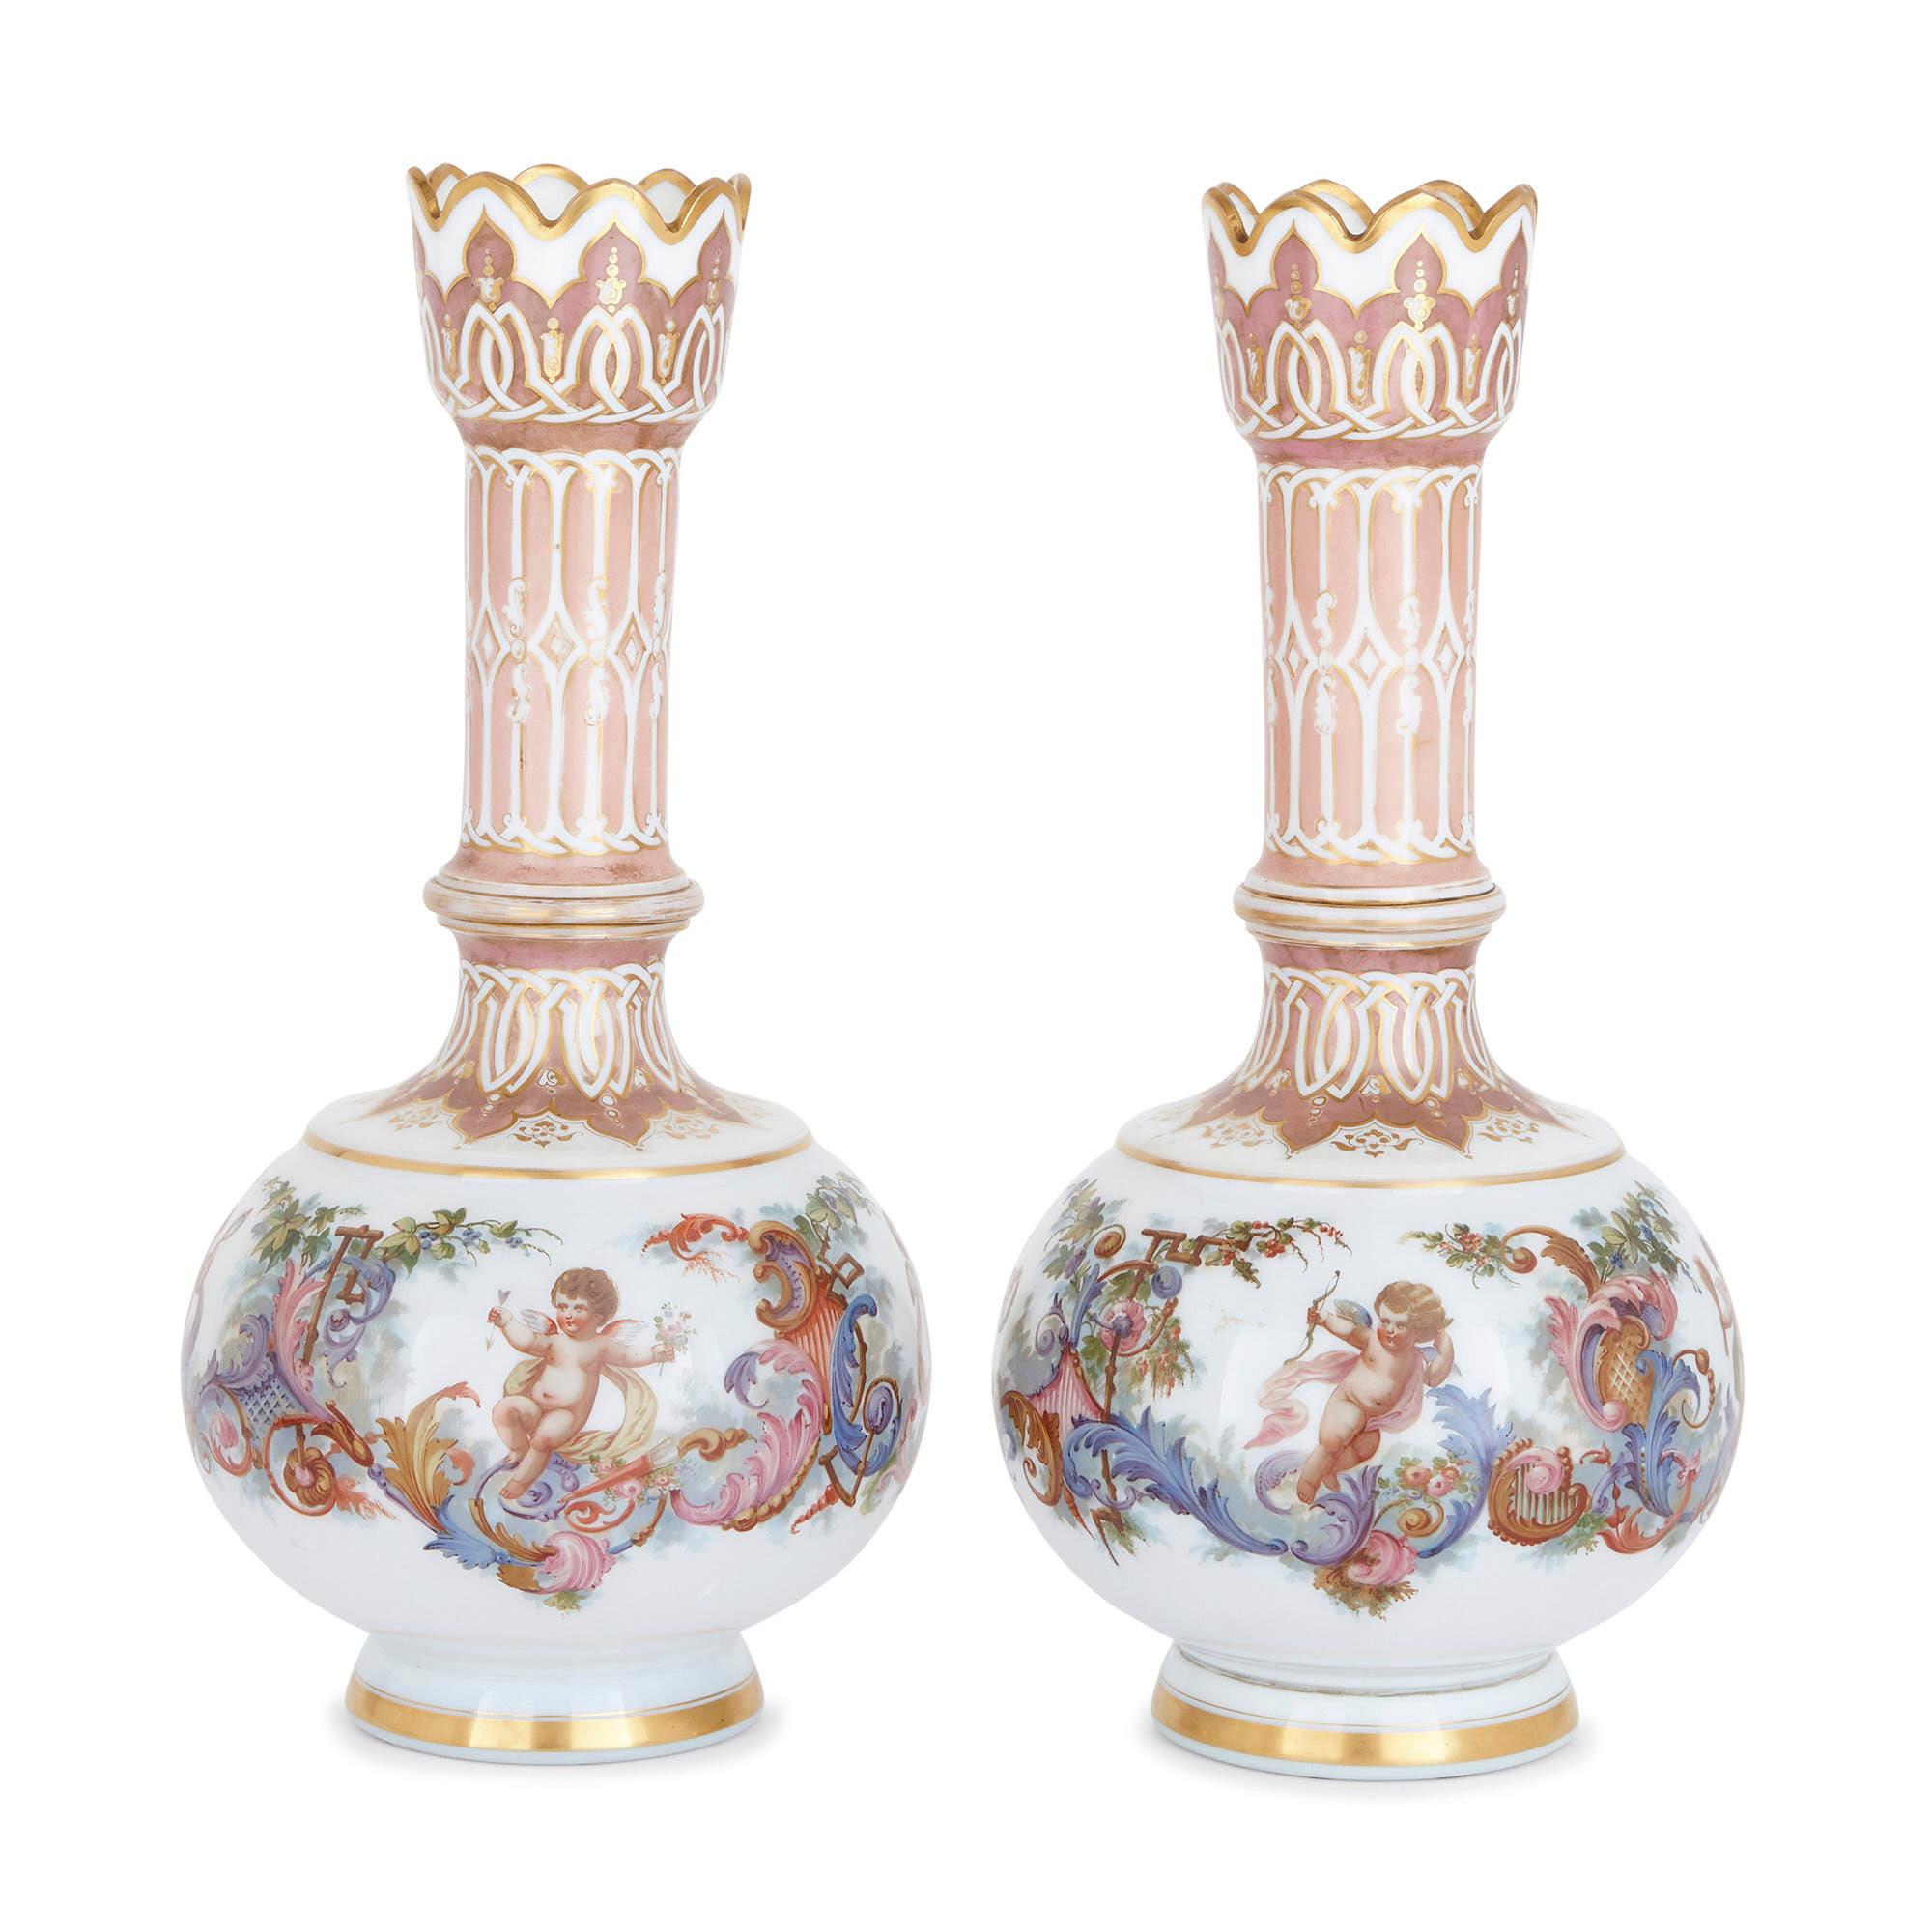 These elegant vases are testament to the quality of Bohemian glass-making in the 19th century. Bohemia (now a part of the Czech Republic) was famous for its glassware since the Renaissance, but it was in the second half of the 19th century that